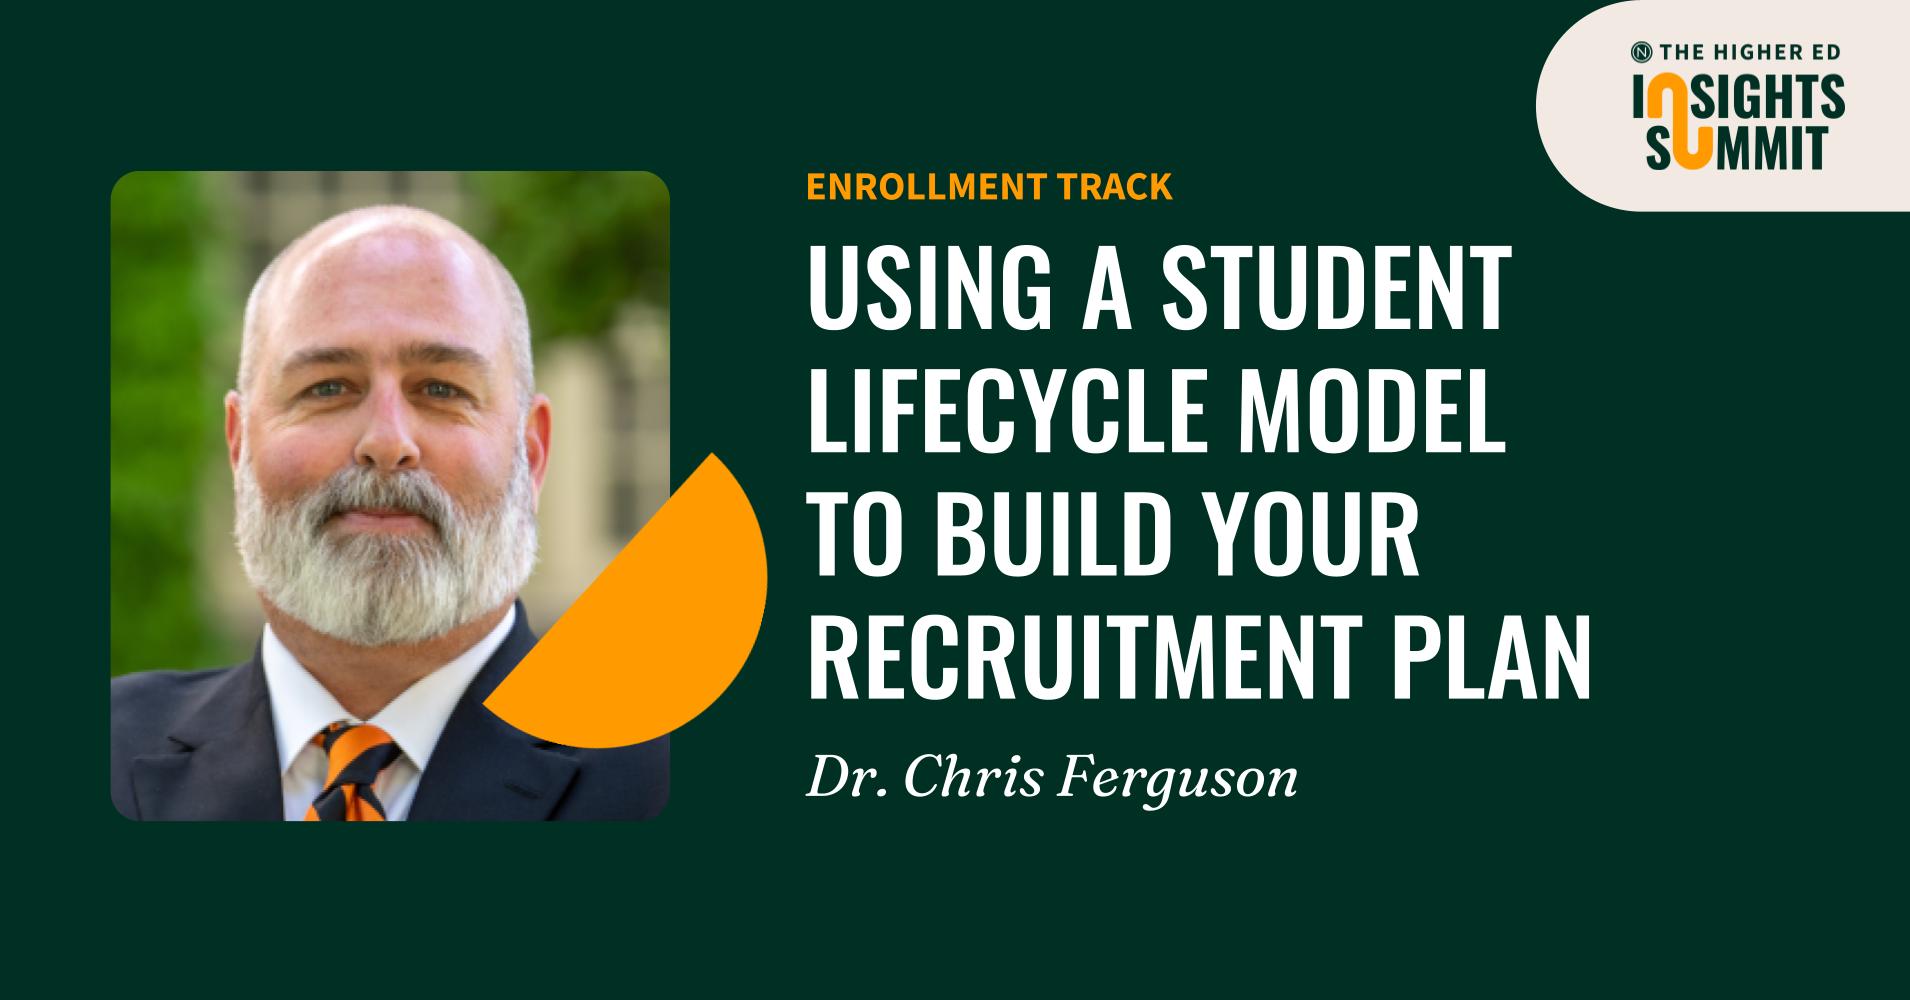 Using a Student Lifecycle Model to Build Your Recruitment Plan